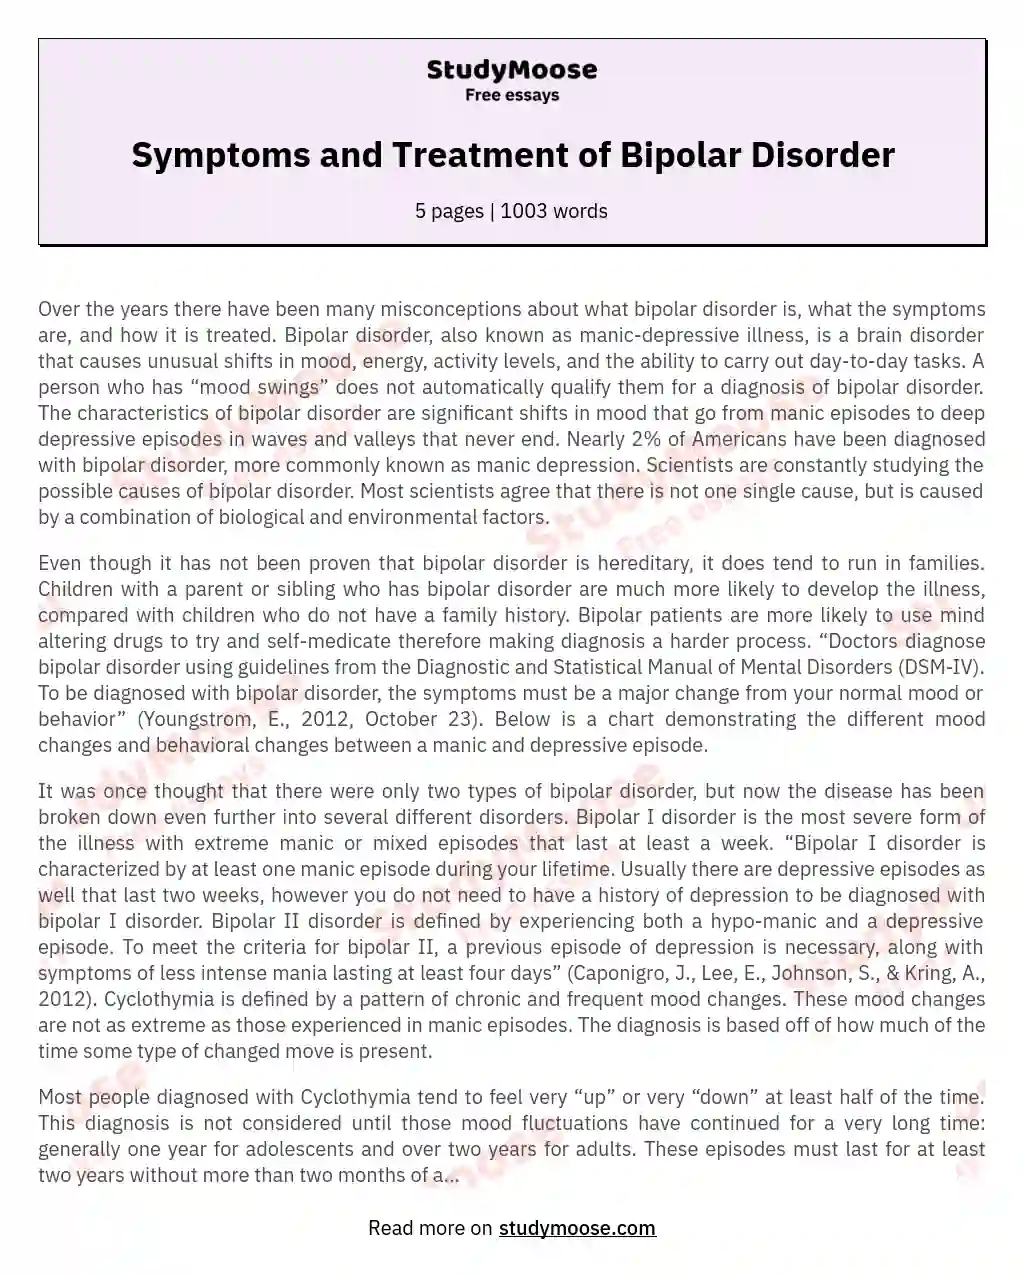 Symptoms and Treatment of Bipolar Disorder